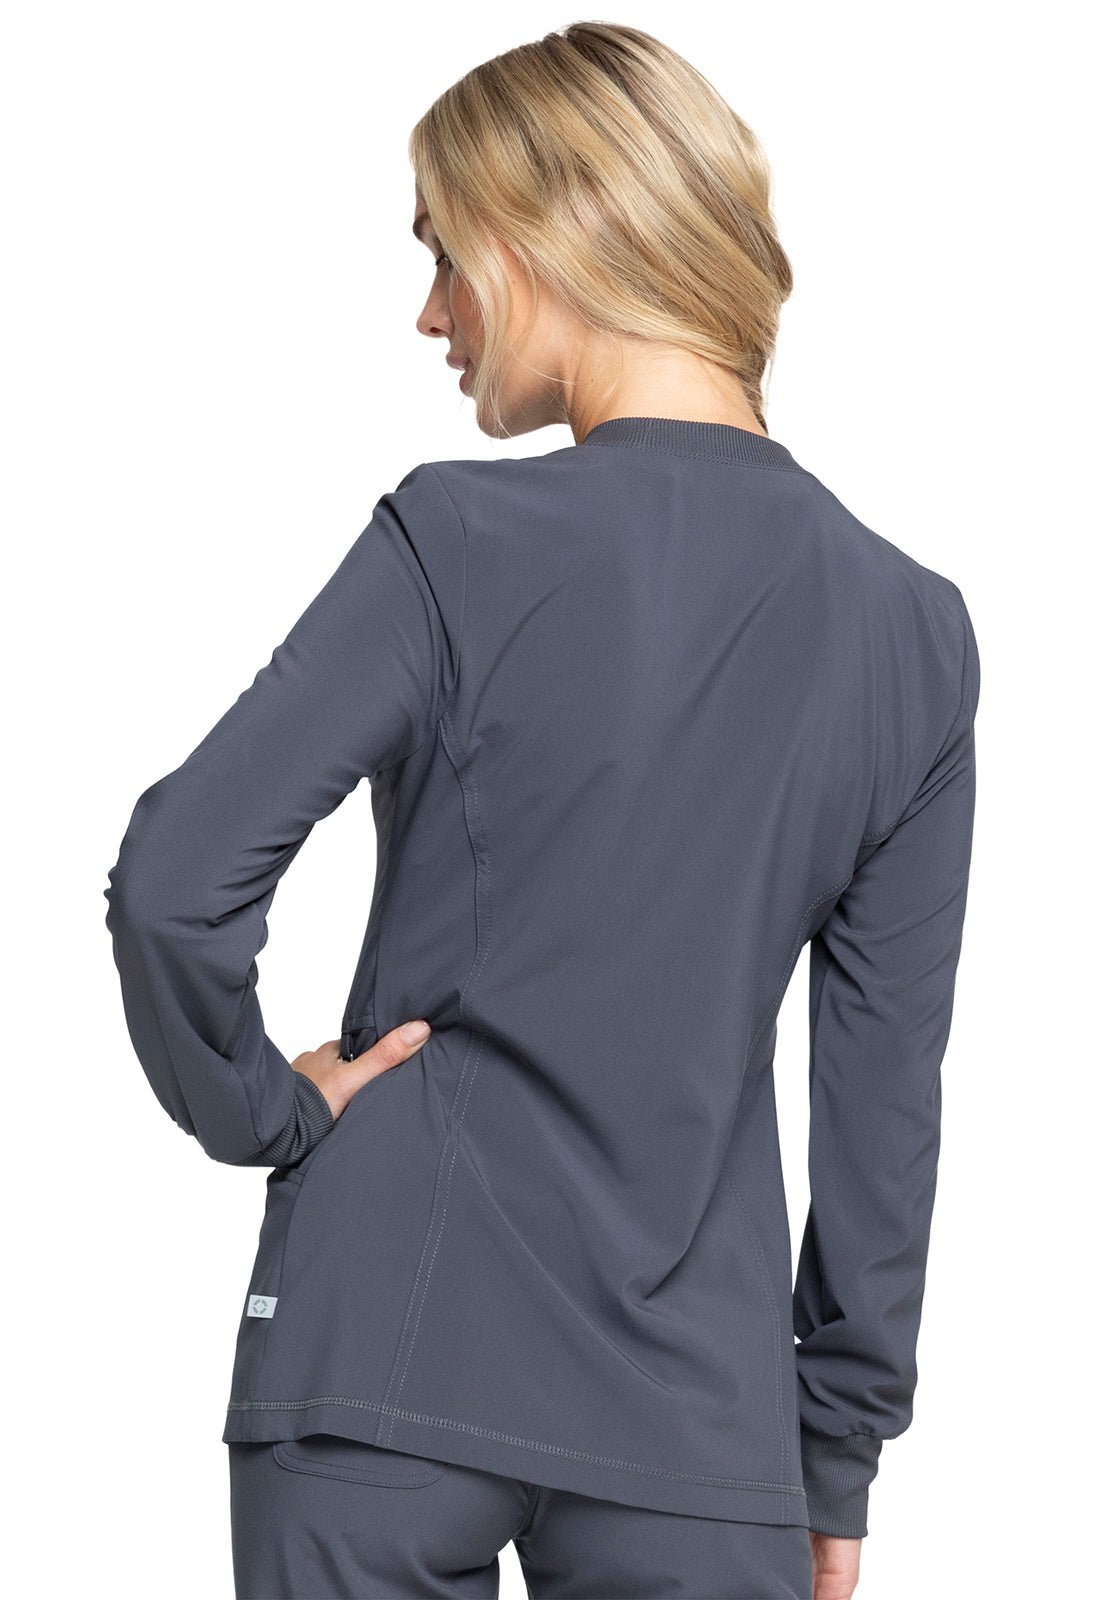 Pewter Cherokee Infinity Zip Front Scrub Jacket CK370A PWPS - Scrubs Select